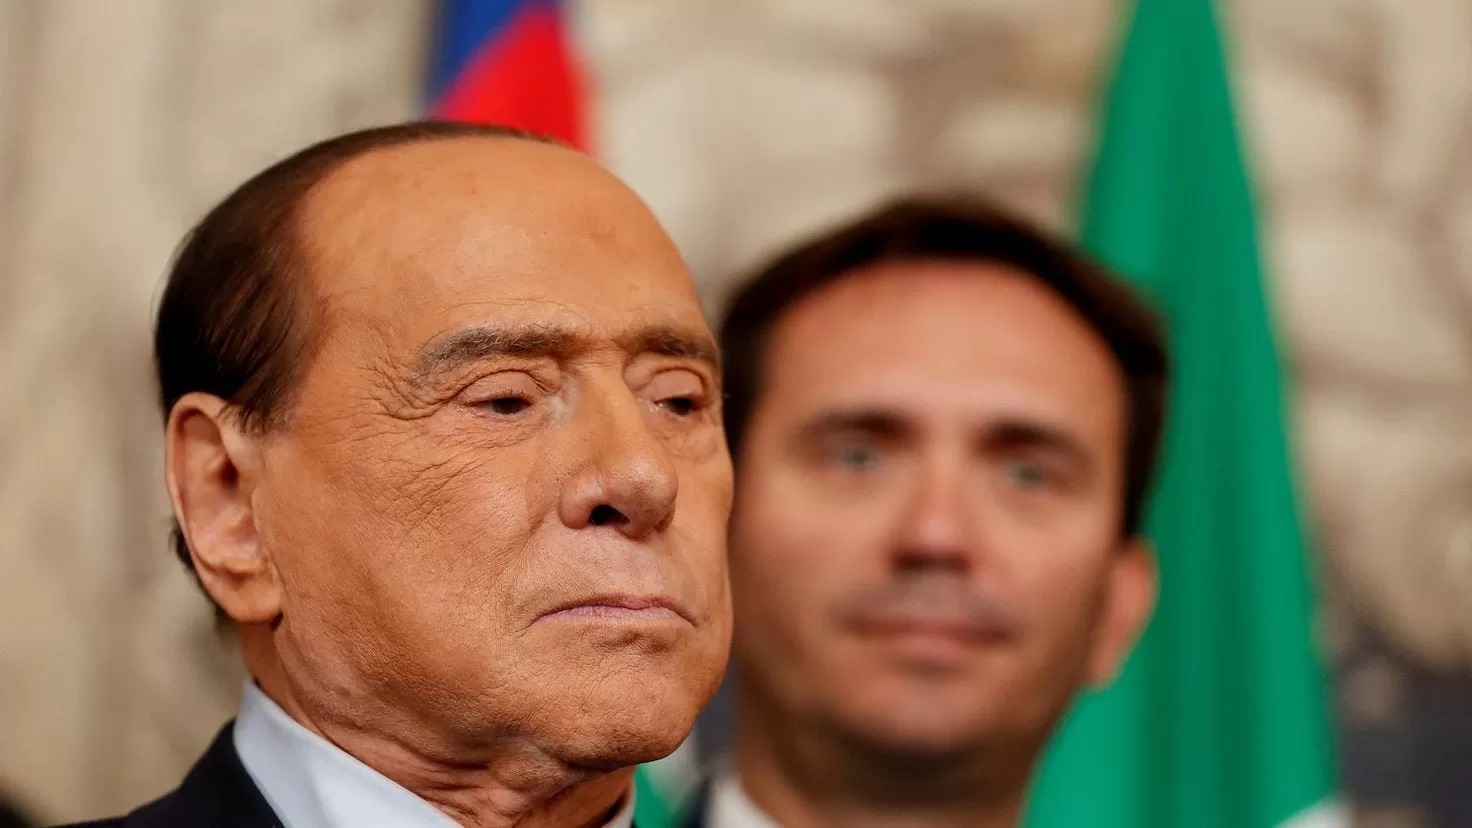 Berlusconi's luxurious mansion in Sardinia is sold for 500 million euros
